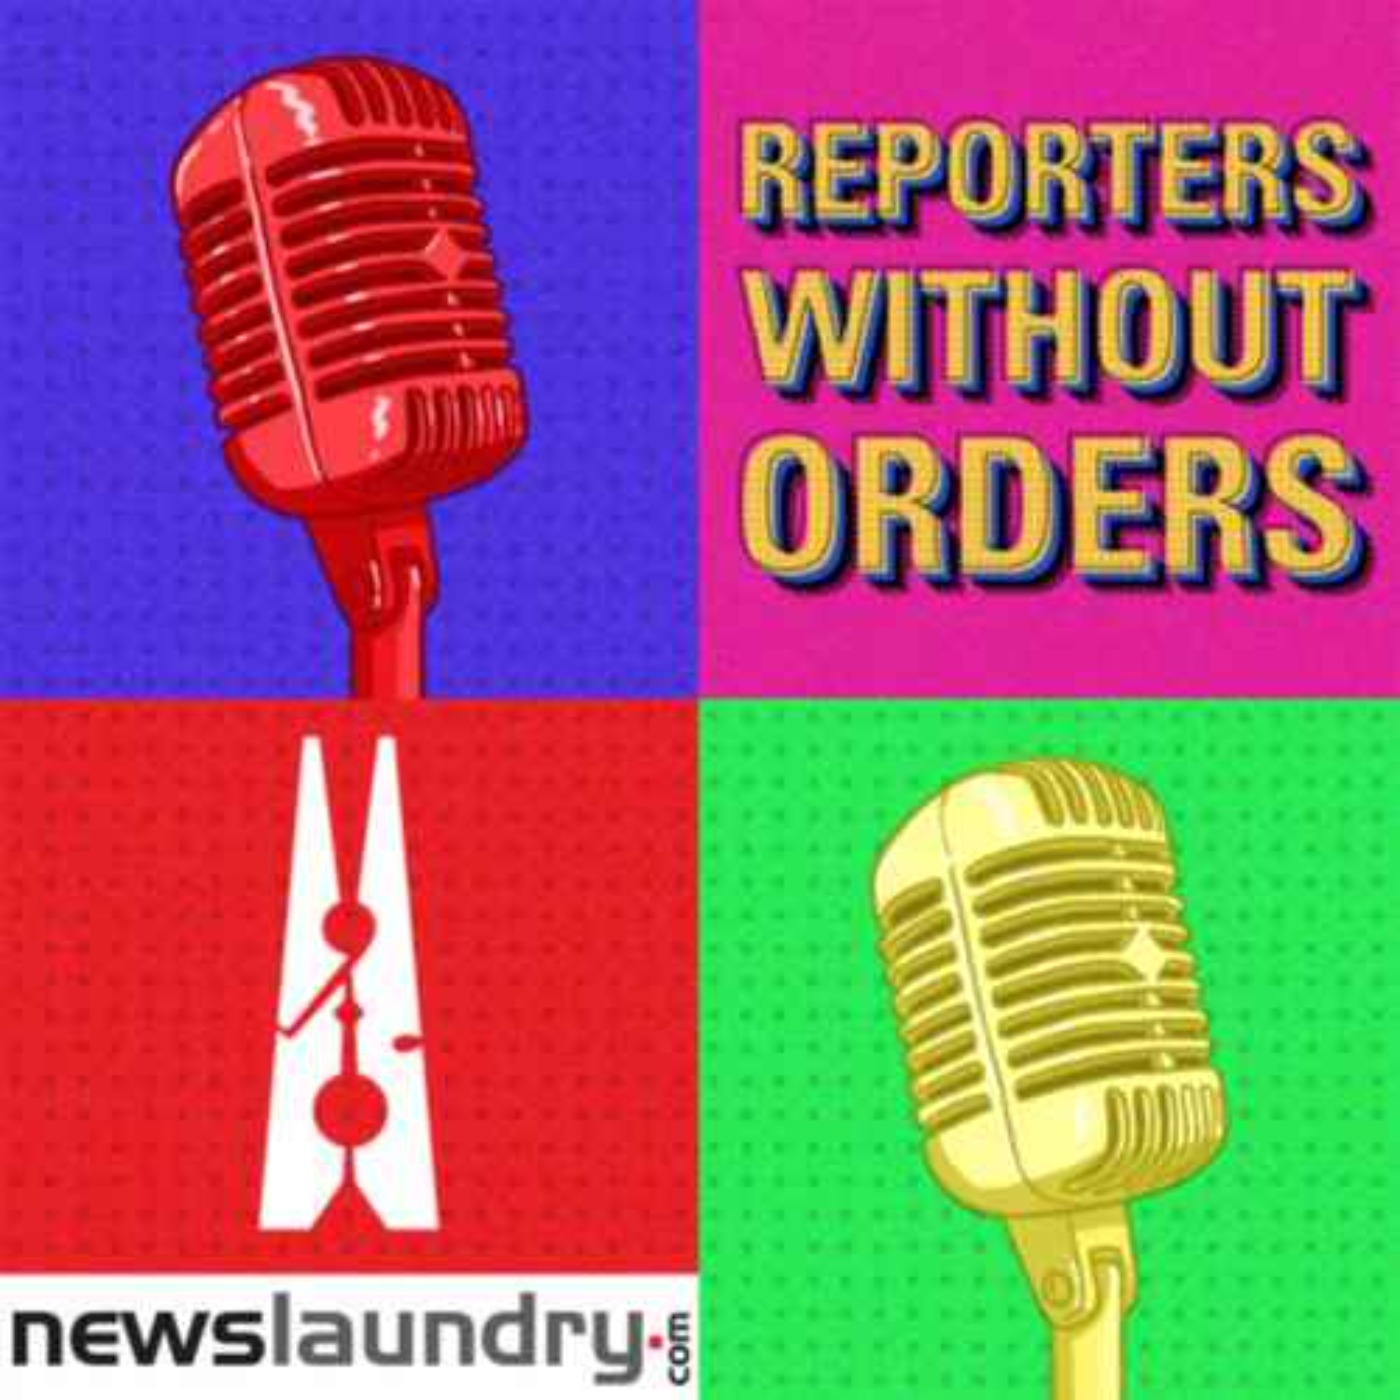 Reporters Without Orders Ep 194: Tripura violence, arrests and unrest